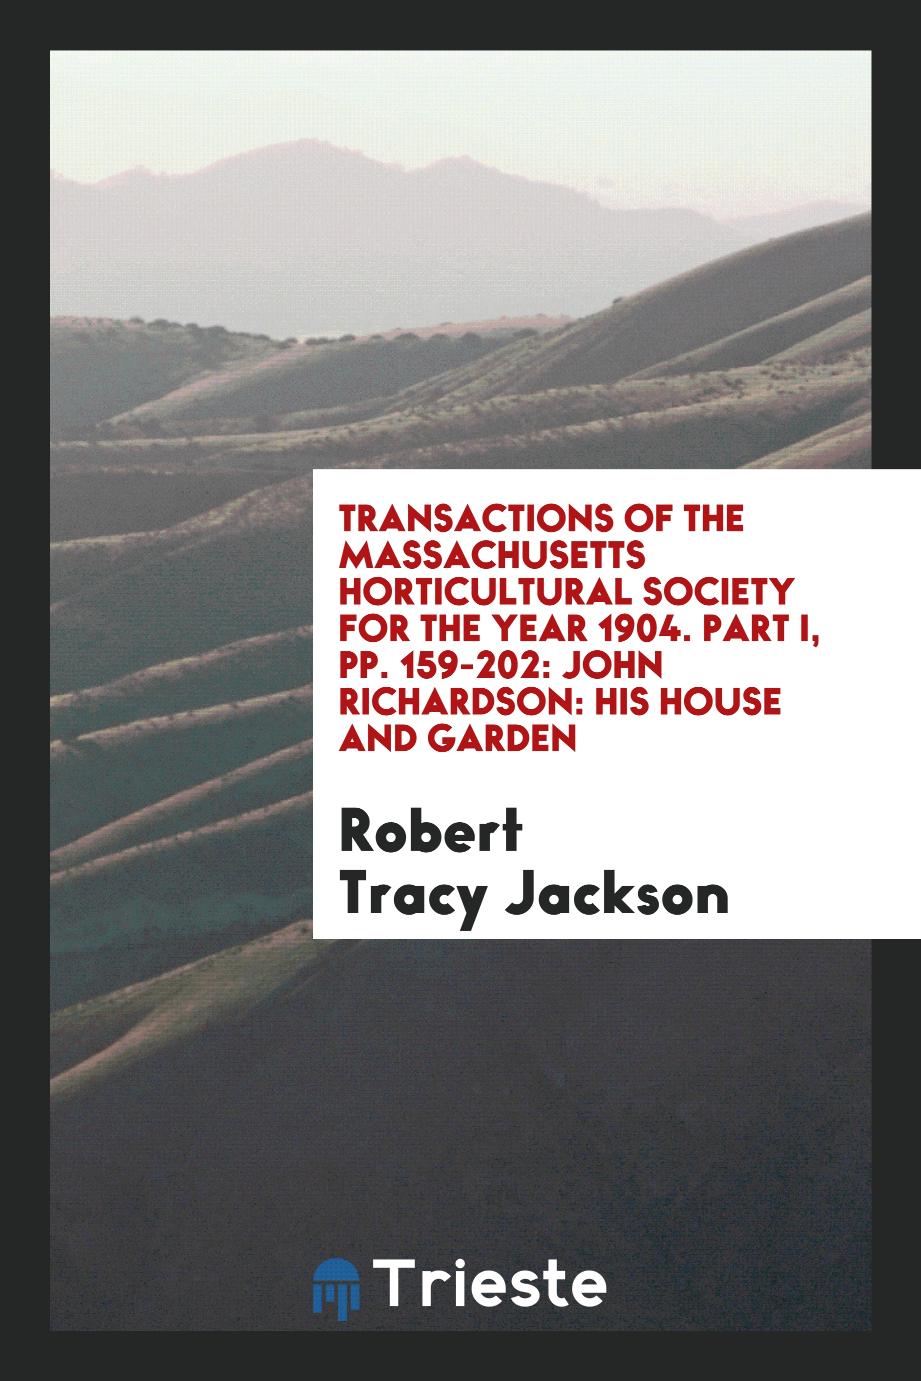 Transactions of the Massachusetts Horticultural Society for the Year 1904. Part I, pp. 159-202: John Richardson: His House and Garden